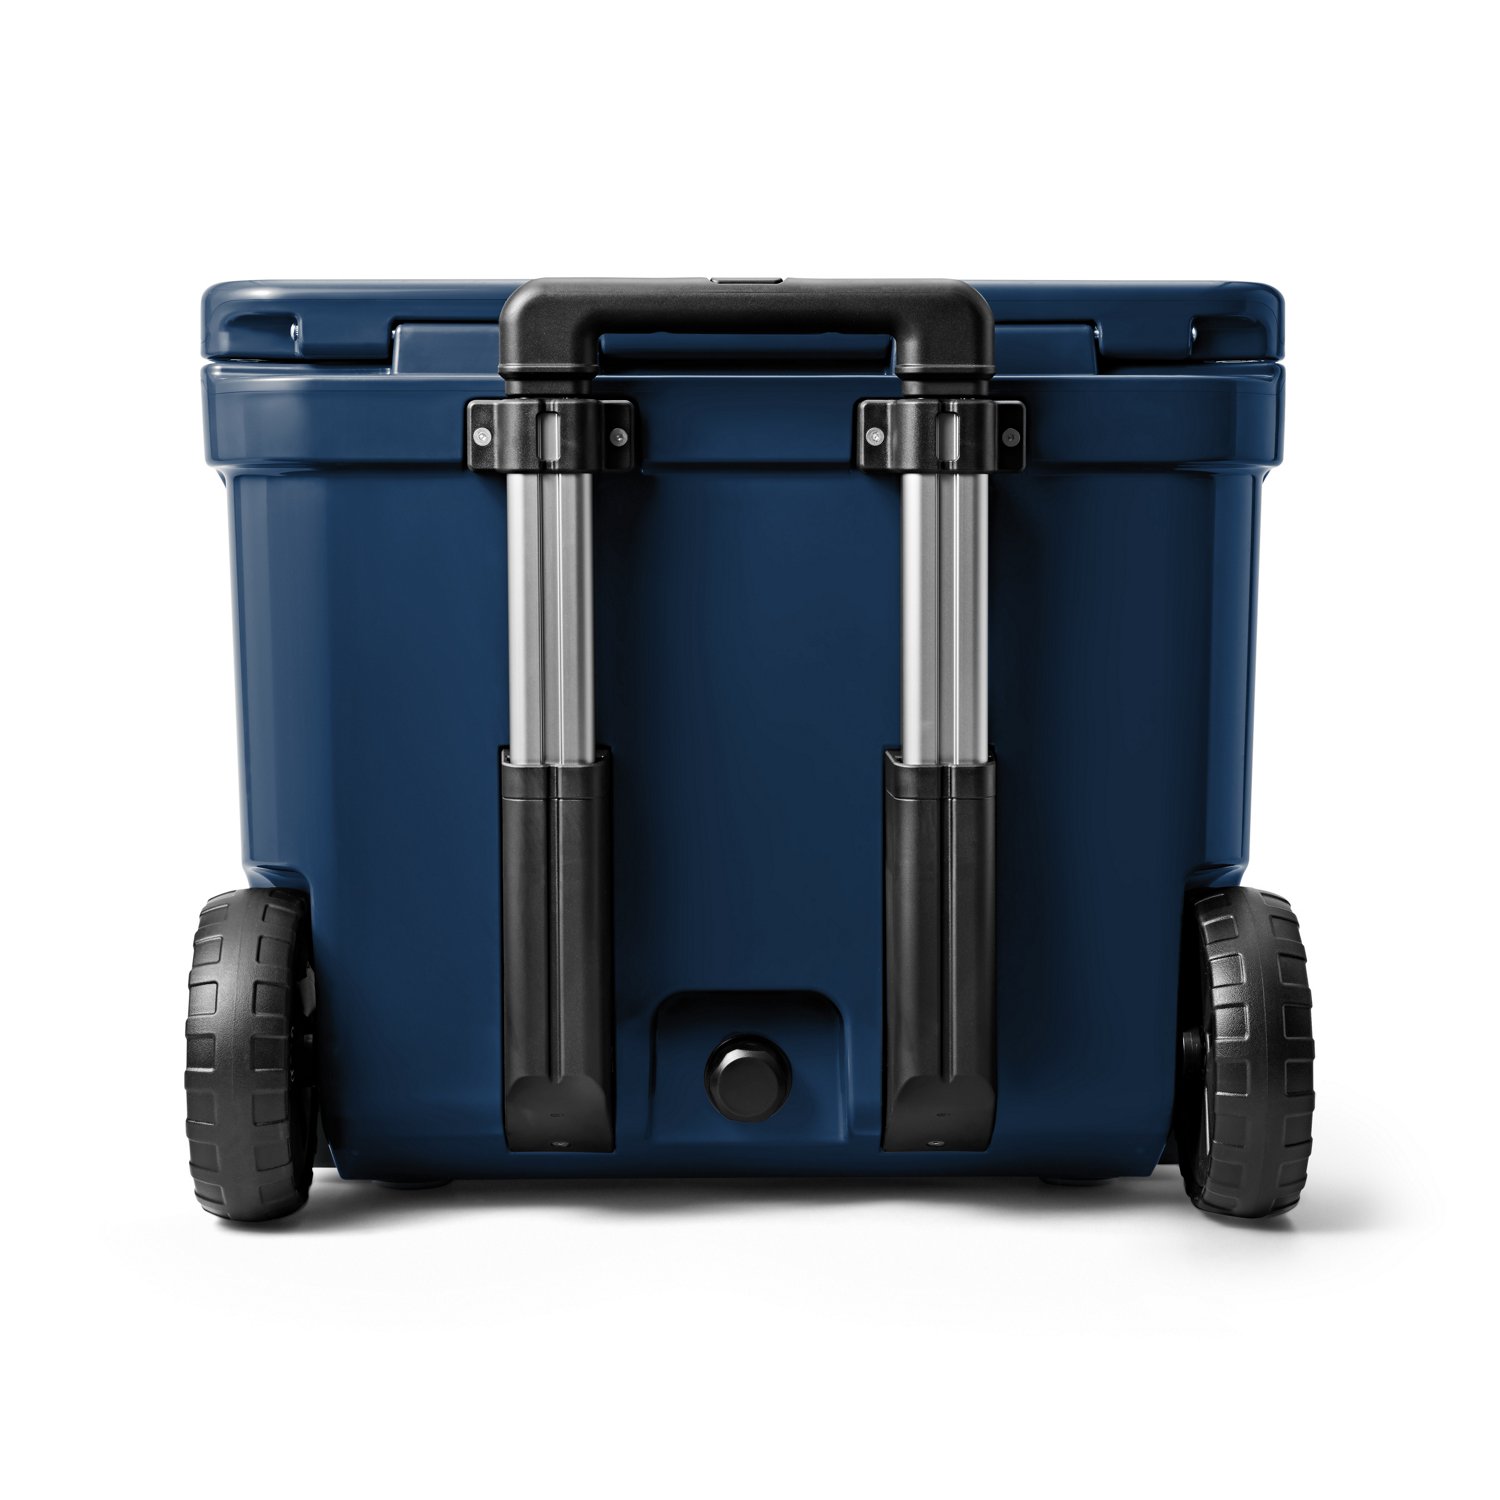 https://academy.scene7.com/is/image/academy///camping/coolers/blue_yeti-roadie-60-wheeled-cooler_10023200000/6d66810463c94df099db81fcc133d165?$pdp-mobile-gallery-ng$